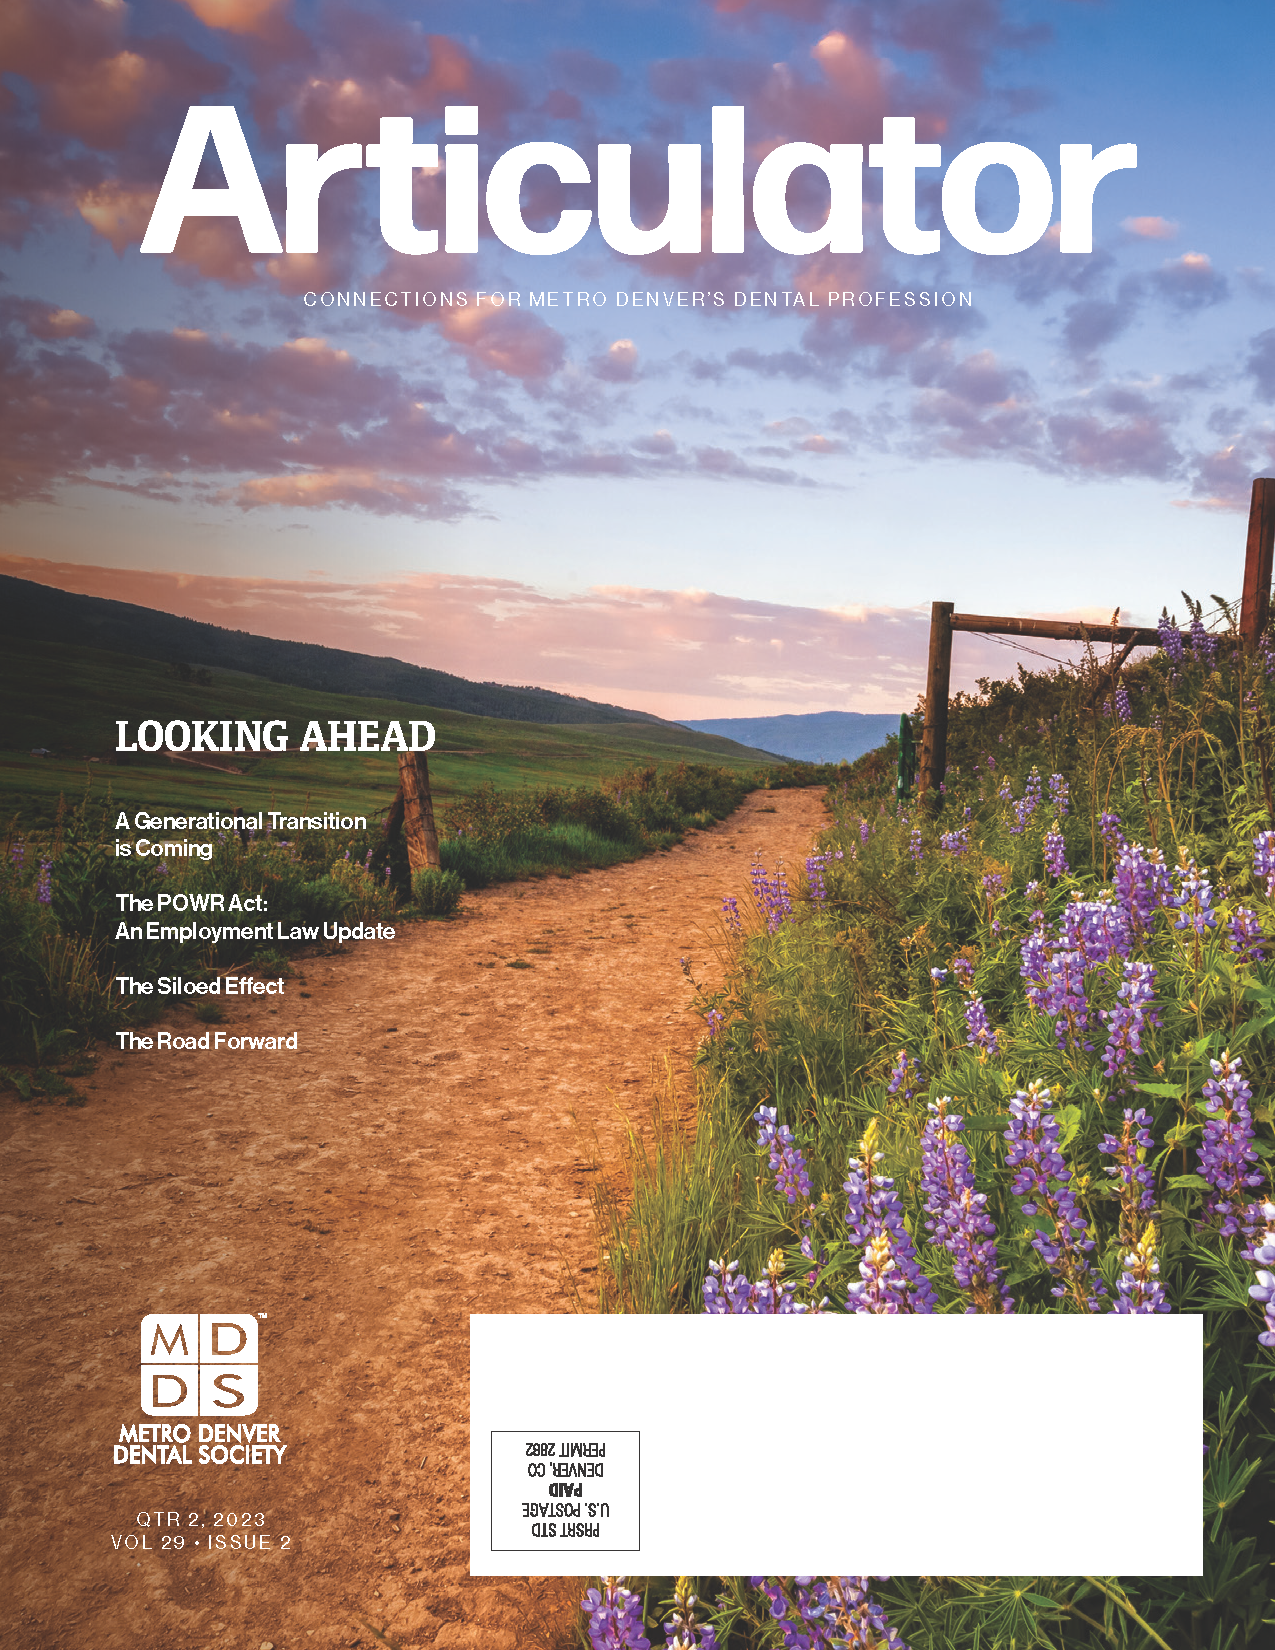 Cover of the Metro Denver Dental Society's Articulator magazine with image of a dirt trail leading through a grassy and hilly valley with purple flowers and an old fence.